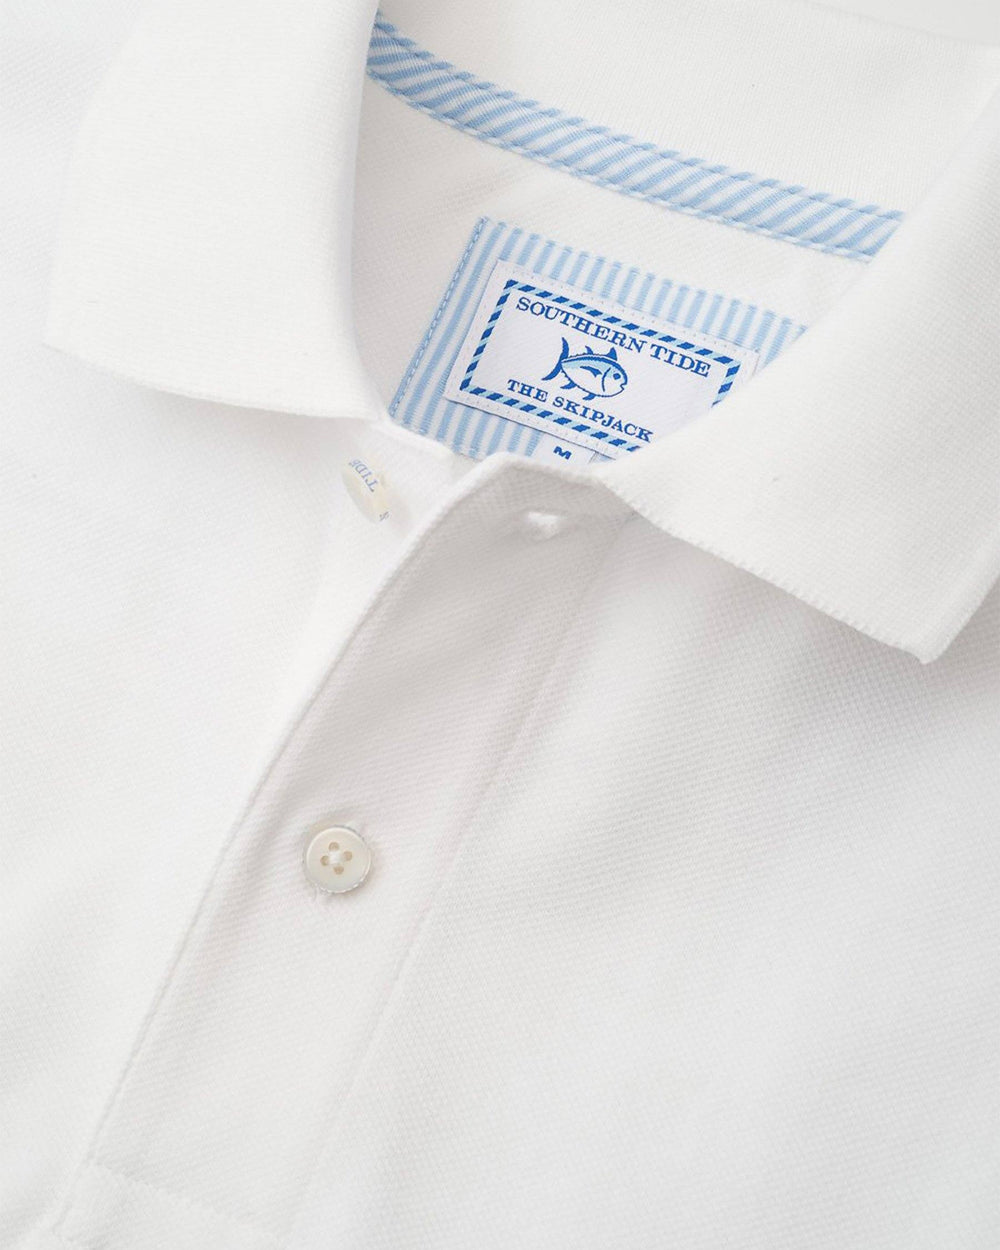 The detail of the Men's White Georgia Southern Pique Polo Shirt by Southern Tide - Classic White